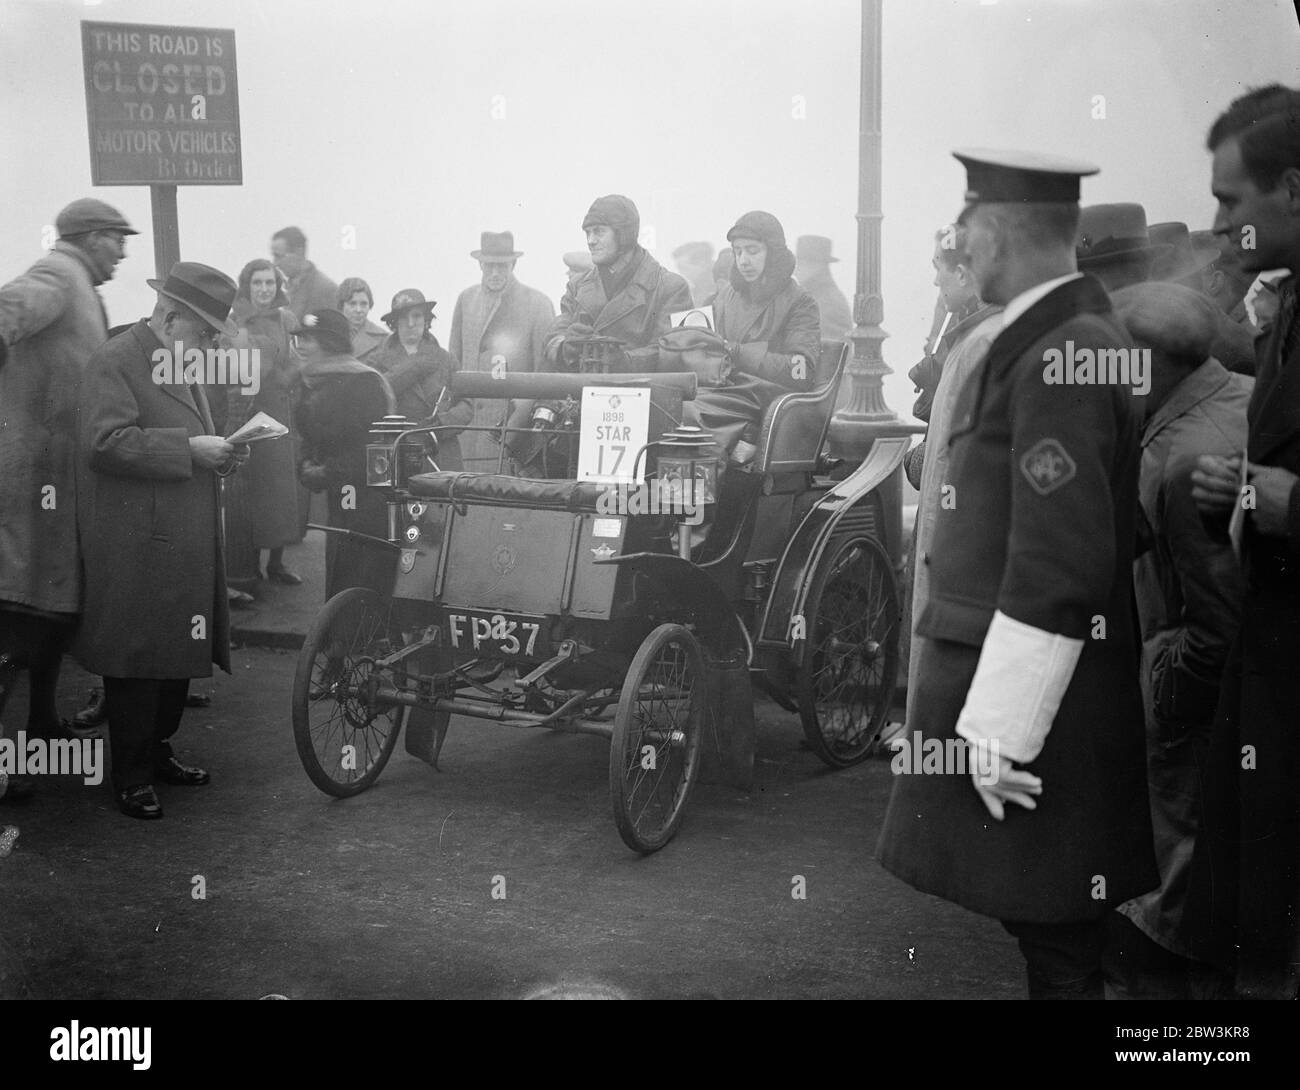 Annual old car run to Brighton starts in fog . In open cars and driving in thick fog , motorists started from The Magazine in Hyde Park , London , on the 41 annual Commemoration run to Brighton . The ' run ' , in which a record 116 cars , each at least 33 years old took part to celebhrate the emancipation of motorists . Before 1896 every motor propelled vehicle had to be preceded by a man with a red flag . Photo shows , F S Rowden ' s 1896 Star , one of the first built by the Star Company , starting from Hyde Park . 21 November 1937 Stock Photo